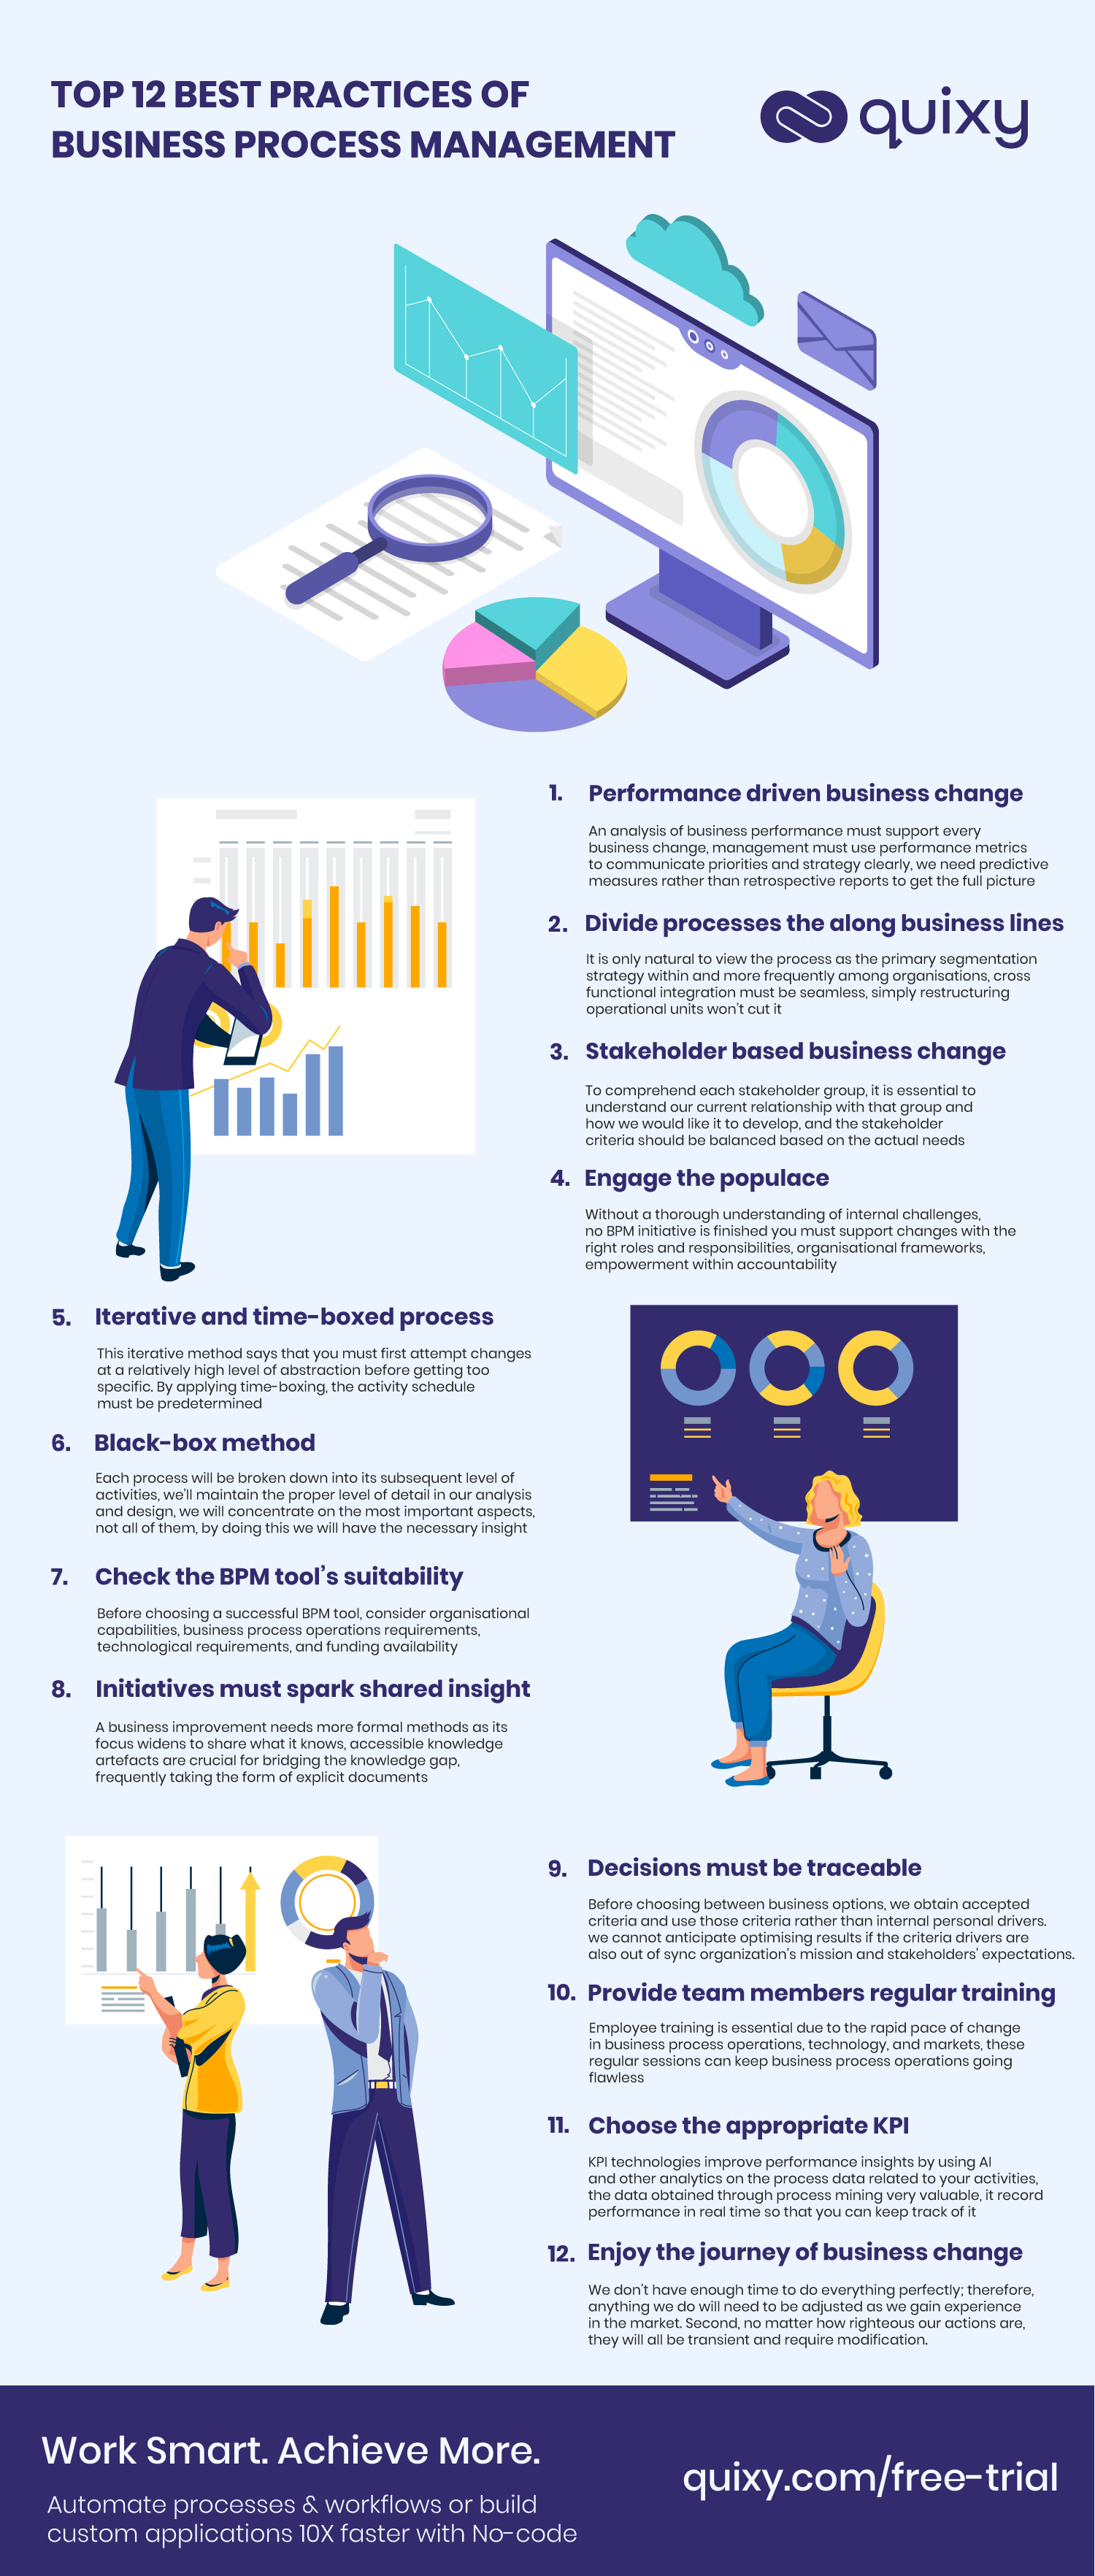 Top 12 Best Practices of Business Process Management (BPM) Infographic